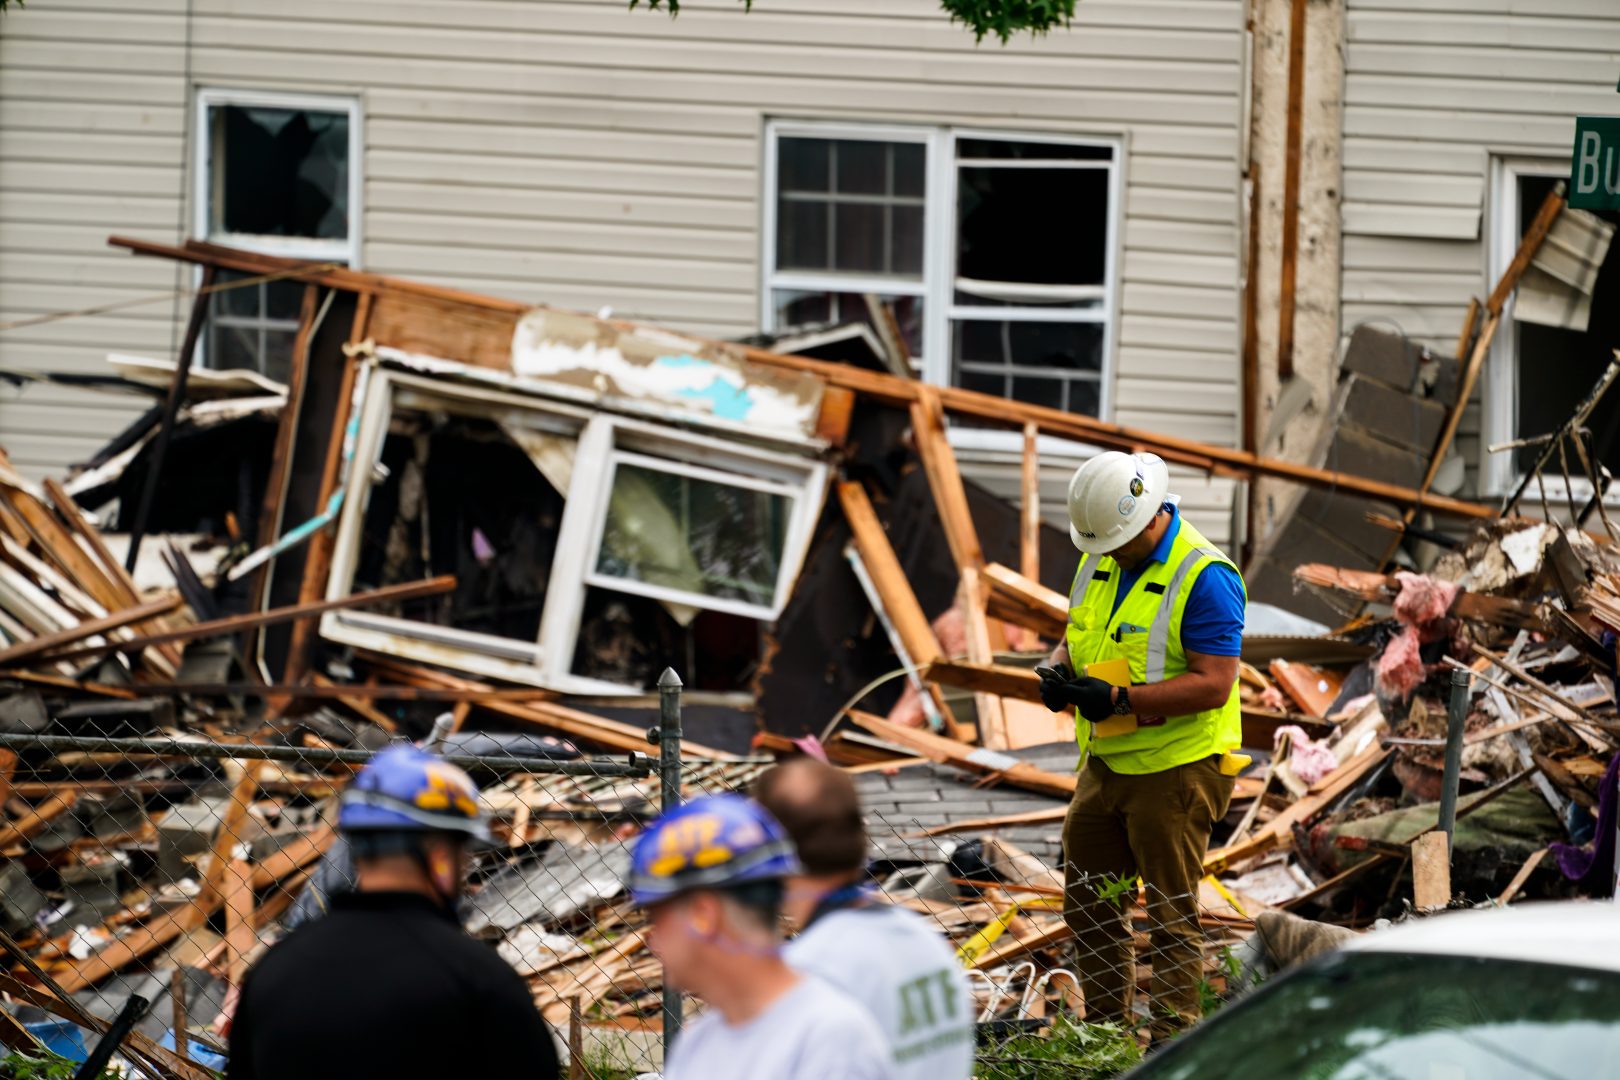 Investigators and utility crews work the scene of a deadly explosion in a residential neighborhood in Pottstown, Pa., Friday, May 27, 2022. A house exploded northwest of Philadelphia, killing several people and leaving  others injured, authorities said Friday.  (AP Photo/Matt Rourke)